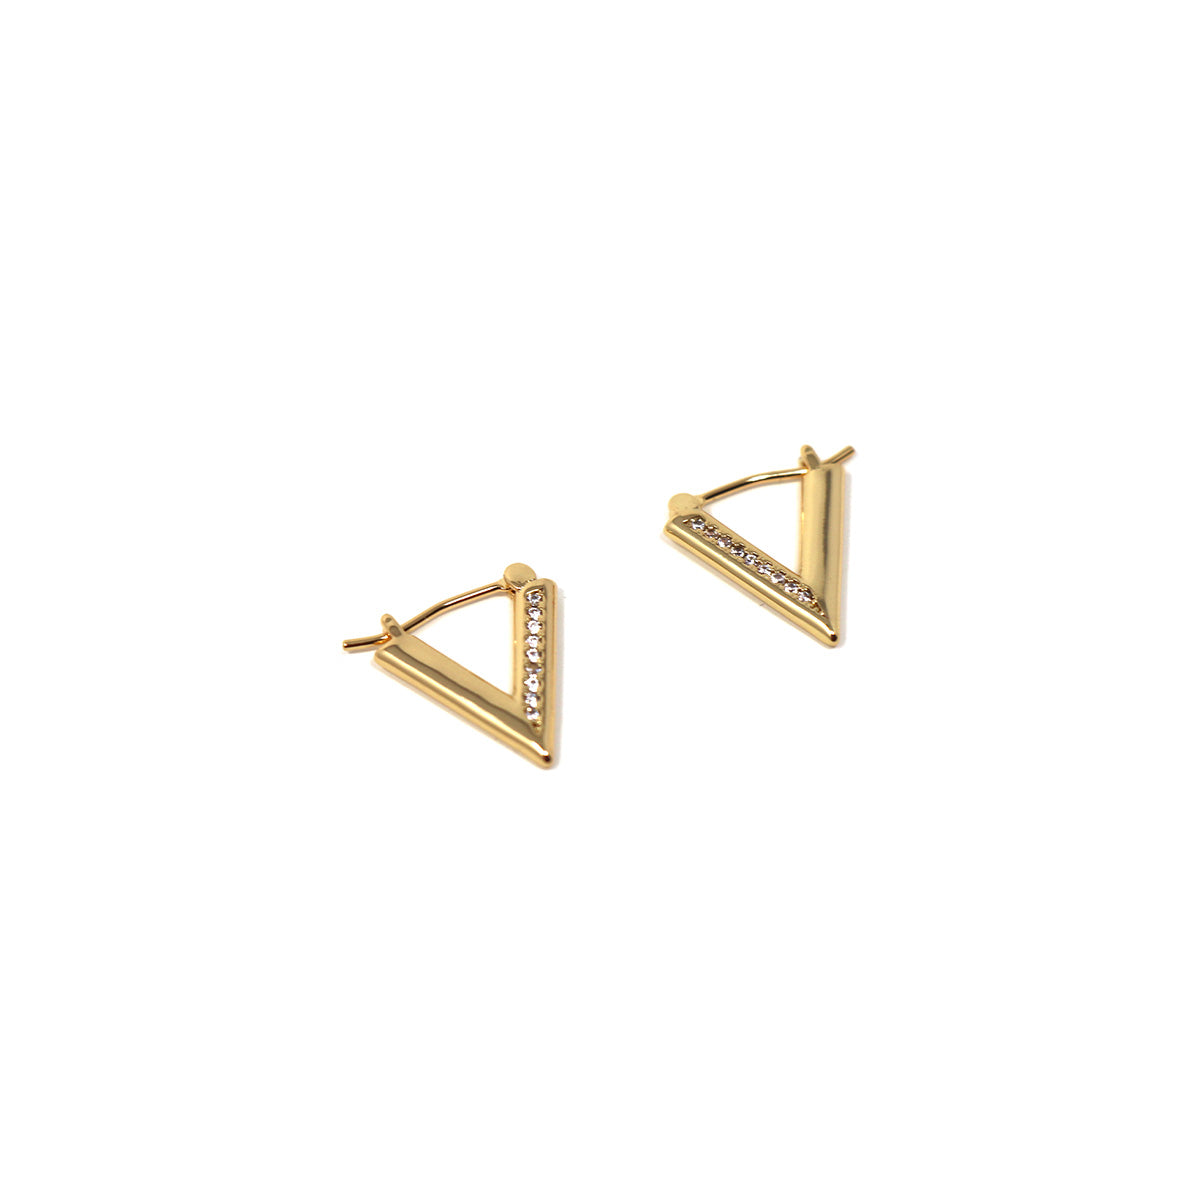 14K Gold Dipped Triangle CZ Earrings